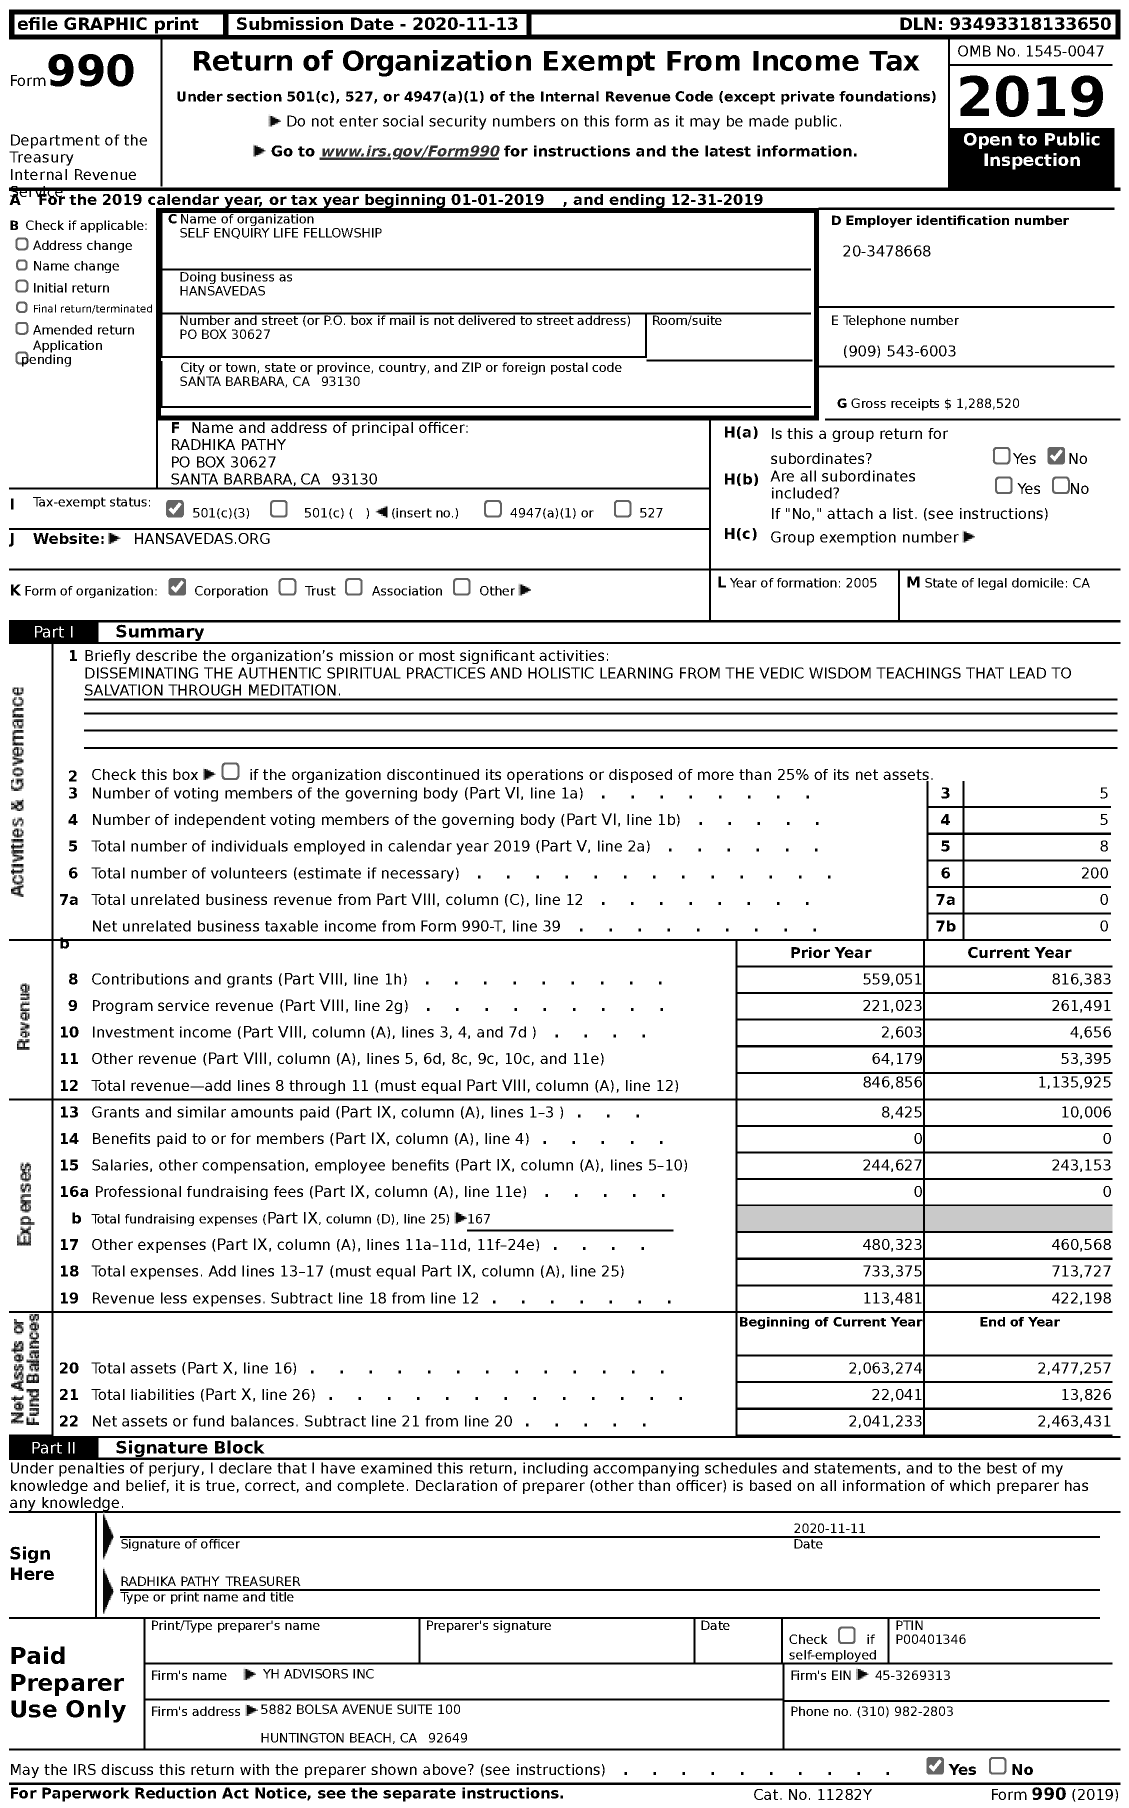 Image of first page of 2019 Form 990 for Hansavedas